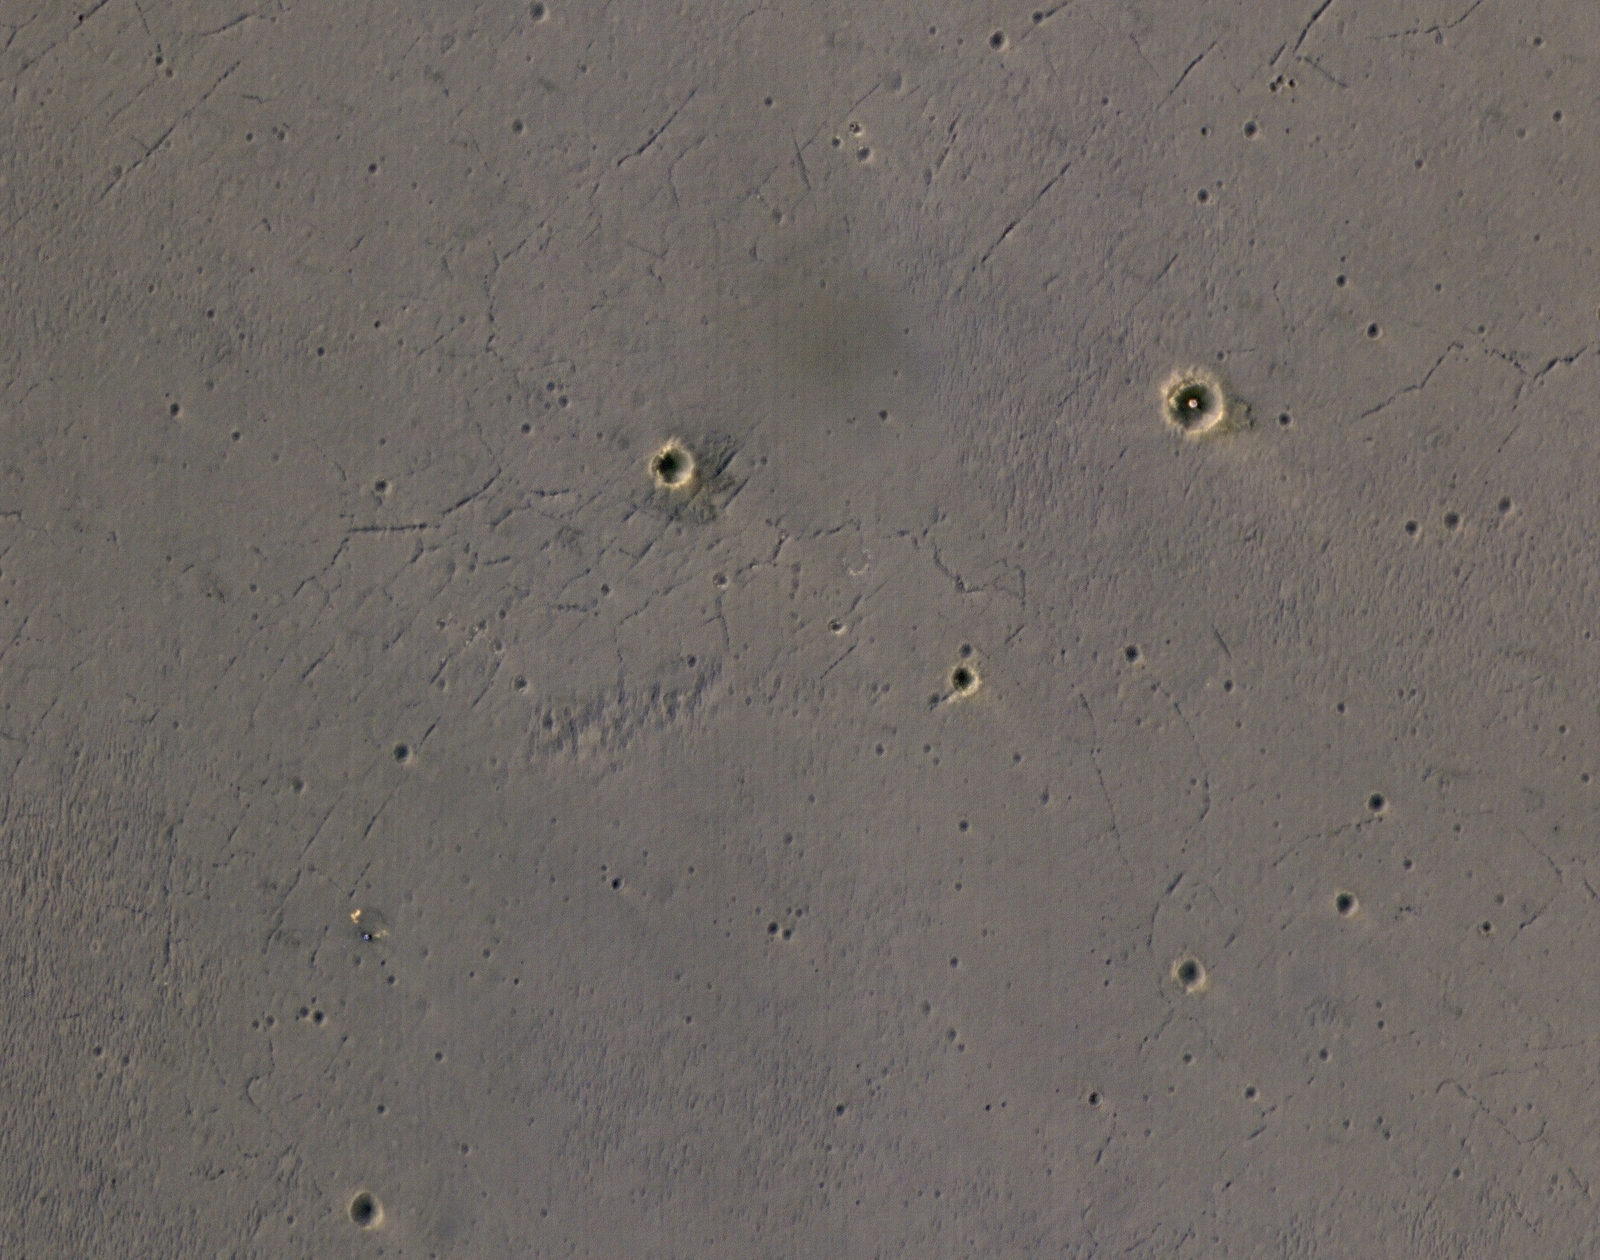 The bright landing platform left behind by NASA's Mars Exploration Rover Opportunity in 2004 is visible inside Eagle Crater, at upper right in this April 8, 2017, observation by NASA's Mars Reconnaissance Orbiter.